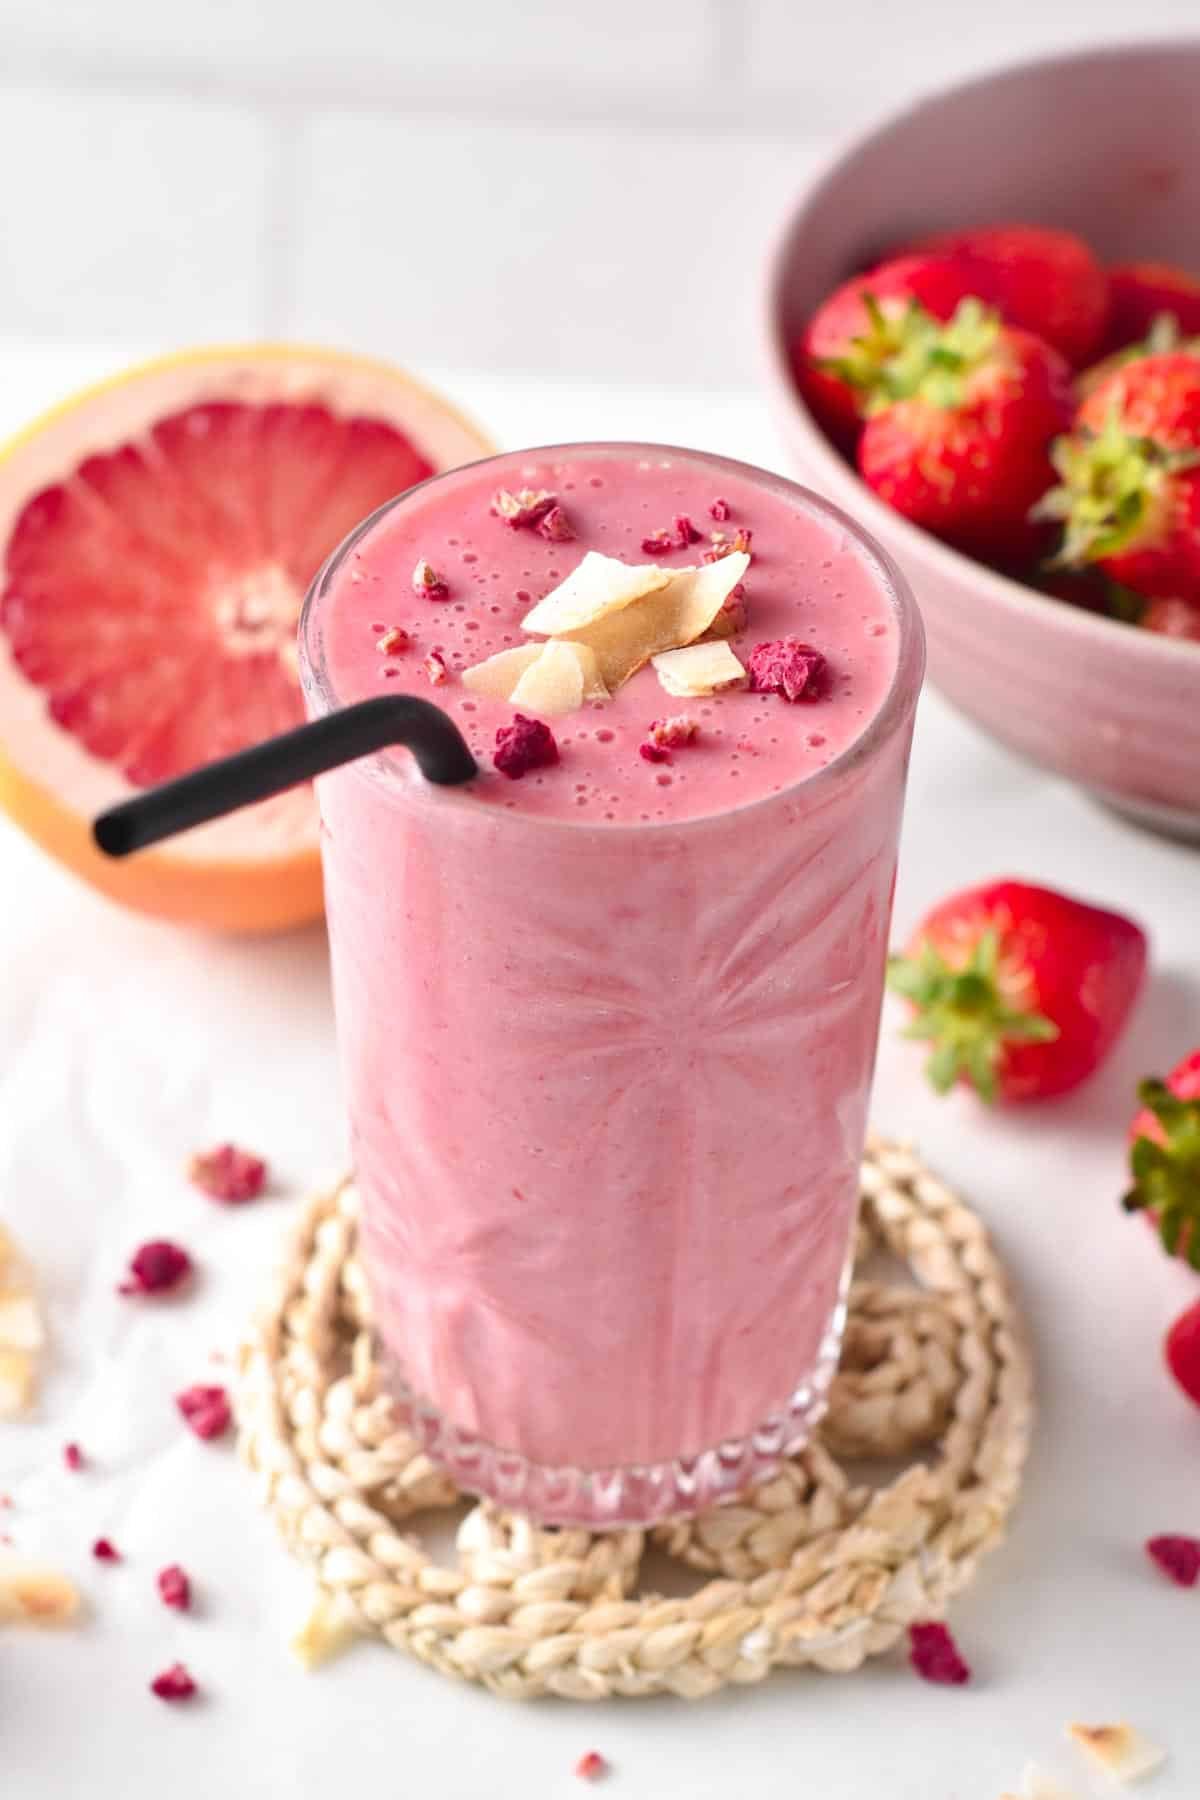 This Grapefruit smoothie is a refreshing sweet and sour pink smoothie recipe packed with vitamin C and antioxidants. 